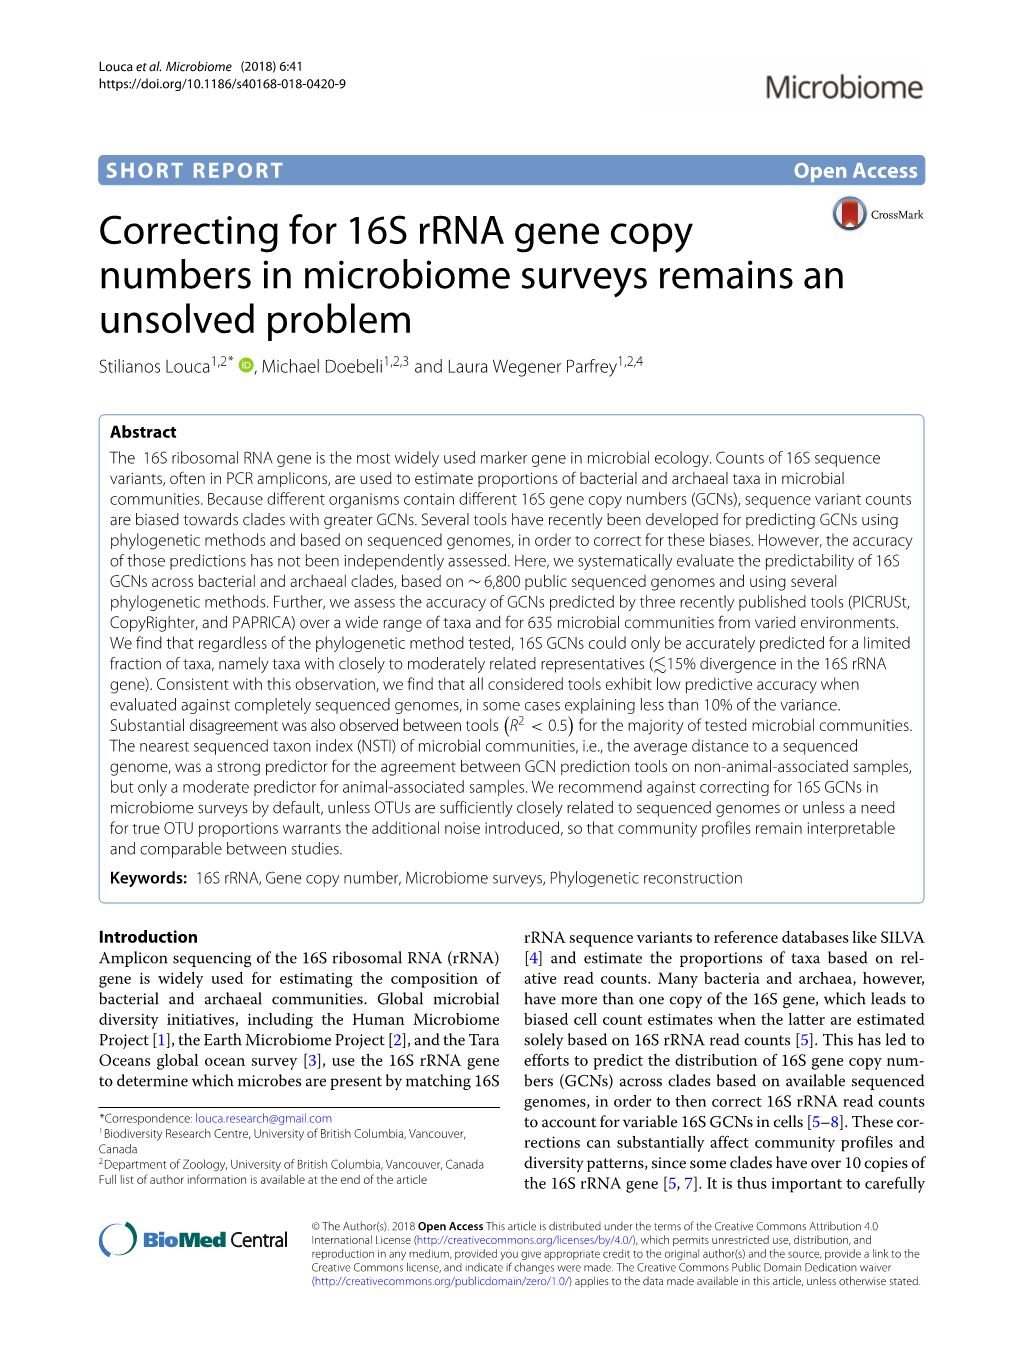 Correcting for 16S Rrna Gene Copy Numbers in Microbiome Surveys Remains an Unsolved Problem Stilianos Louca1,2* , Michael Doebeli1,2,3 and Laura Wegener Parfrey1,2,4